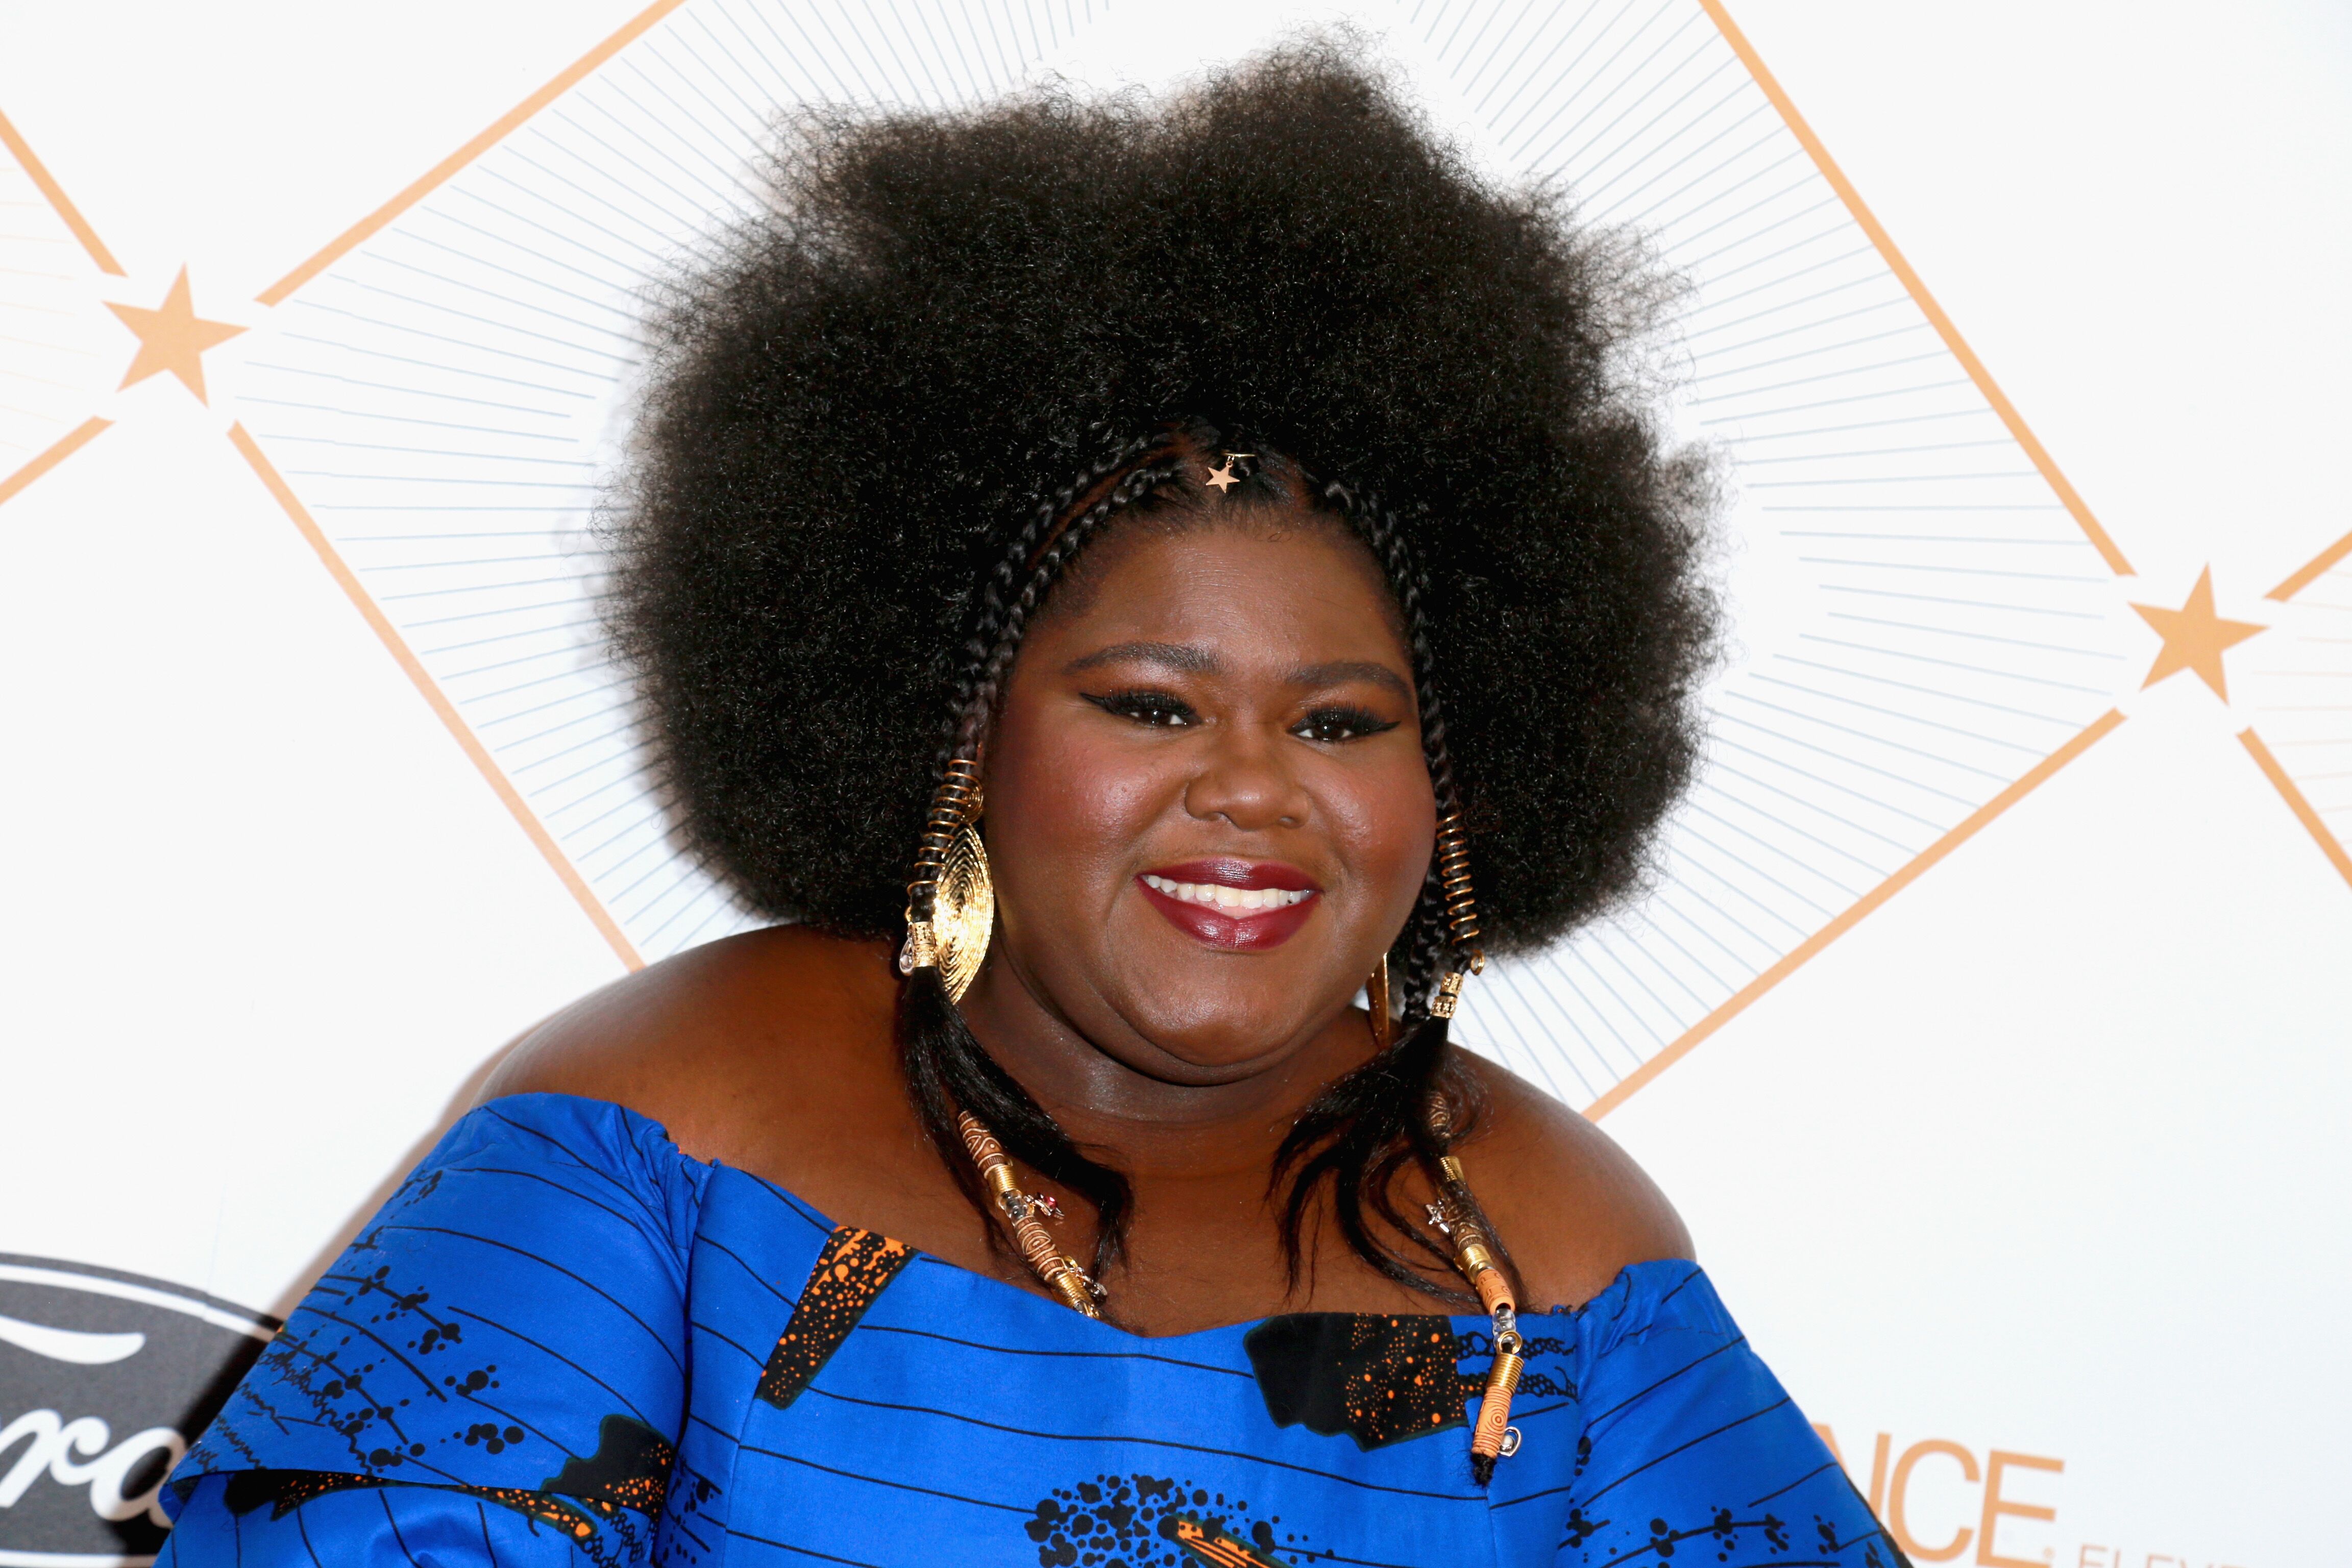 Gabourey Sidibe attends the 2018 Essence Black Women In Hollywood Oscars Luncheon at Regent Beverly Wilshire Hotel on March 1, 2018 | Photo: Getty Images